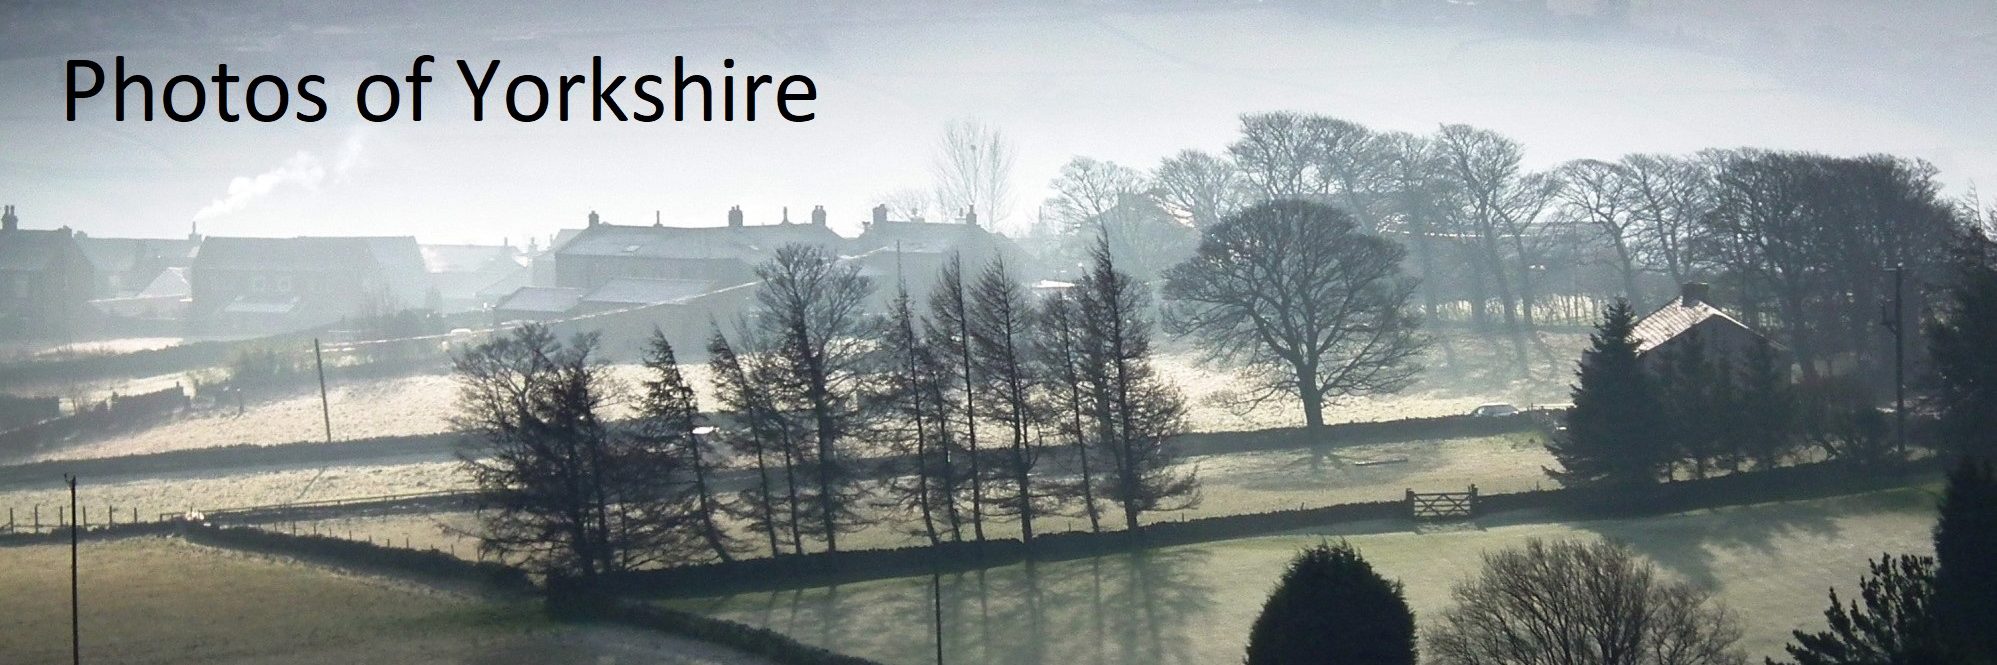 Photos of Yorkshire